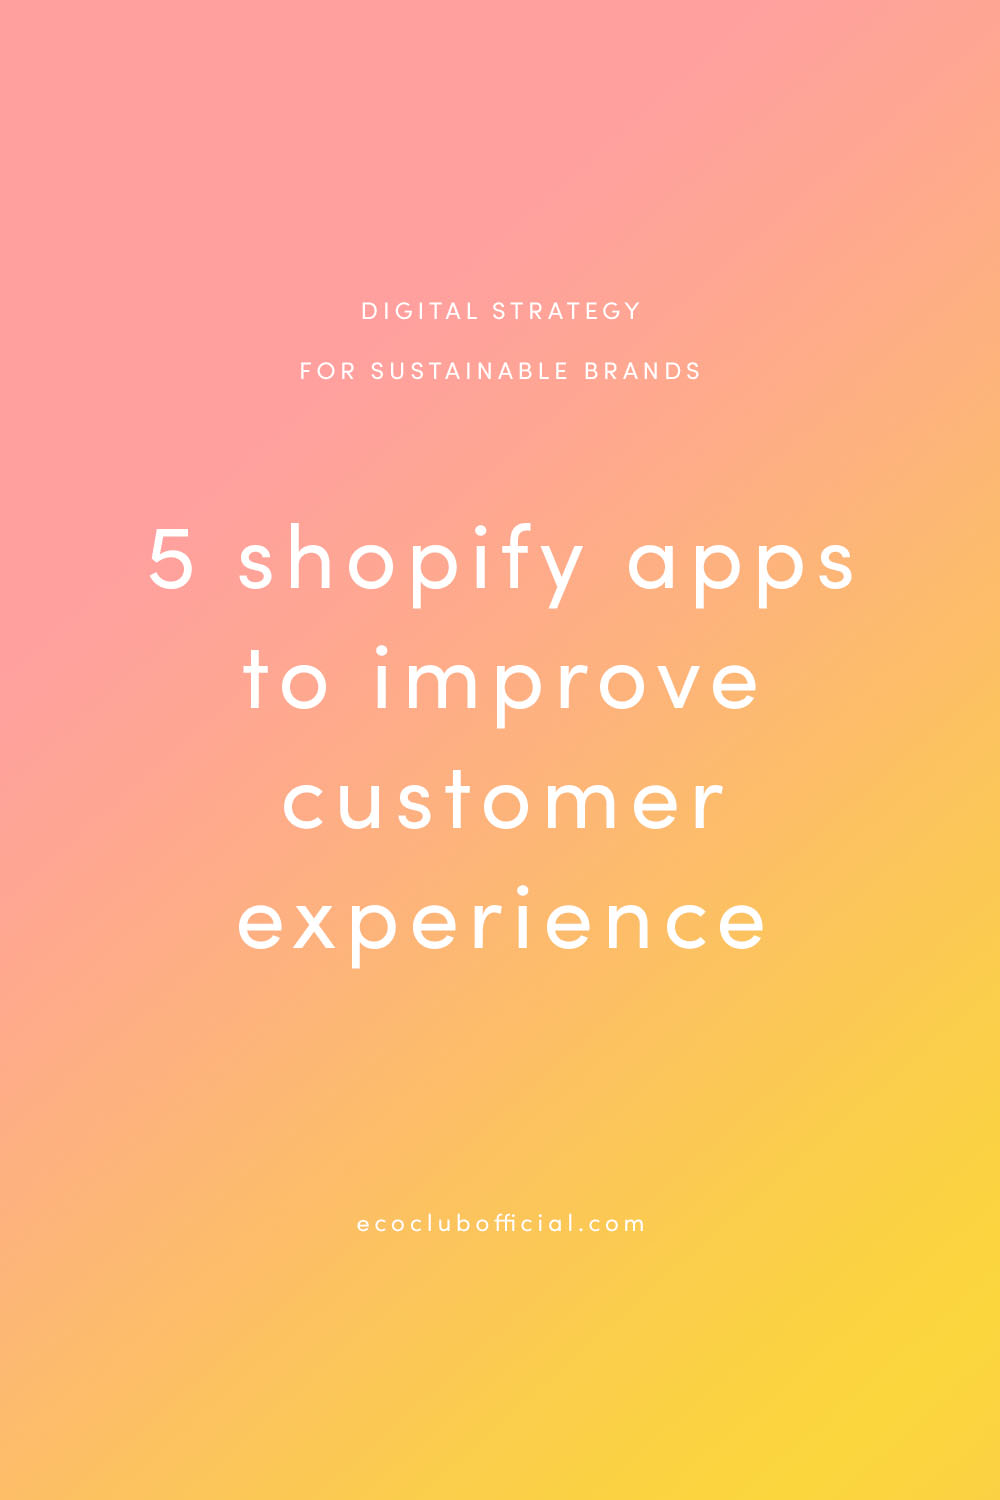 5 Shopify Apps to Strengthen Customer Experience - via eco club